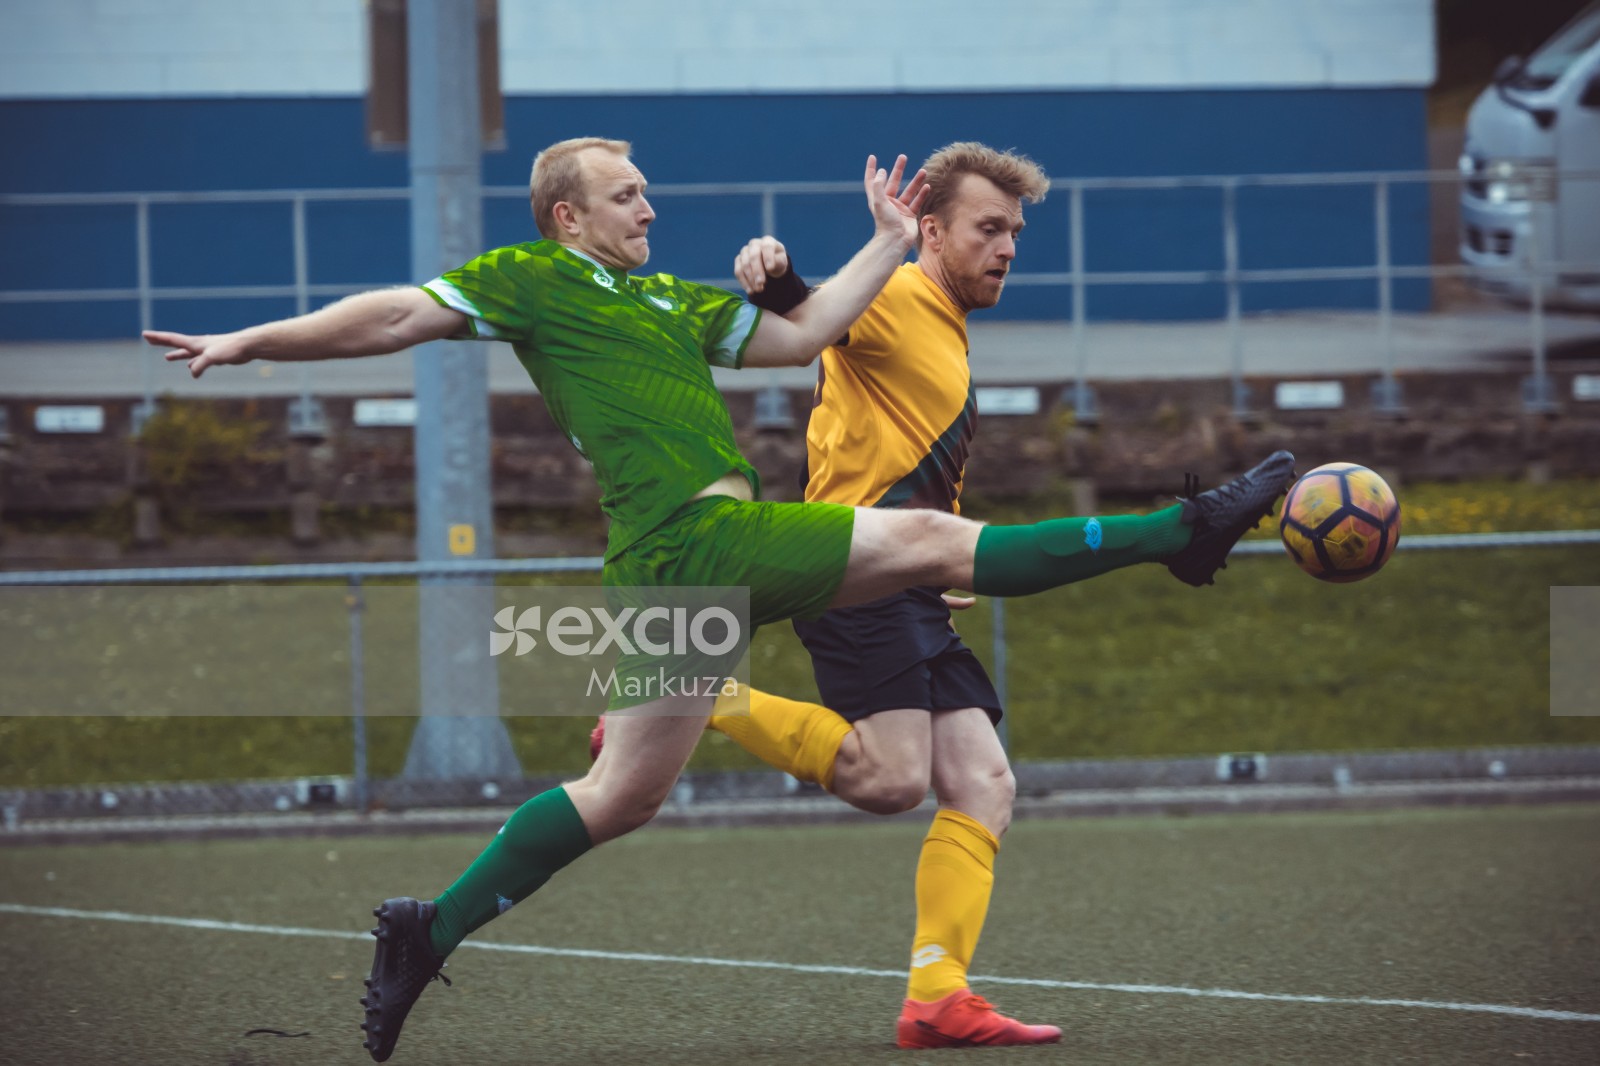 Football player in green kit trying for possession of football - Sports Zone sunday league